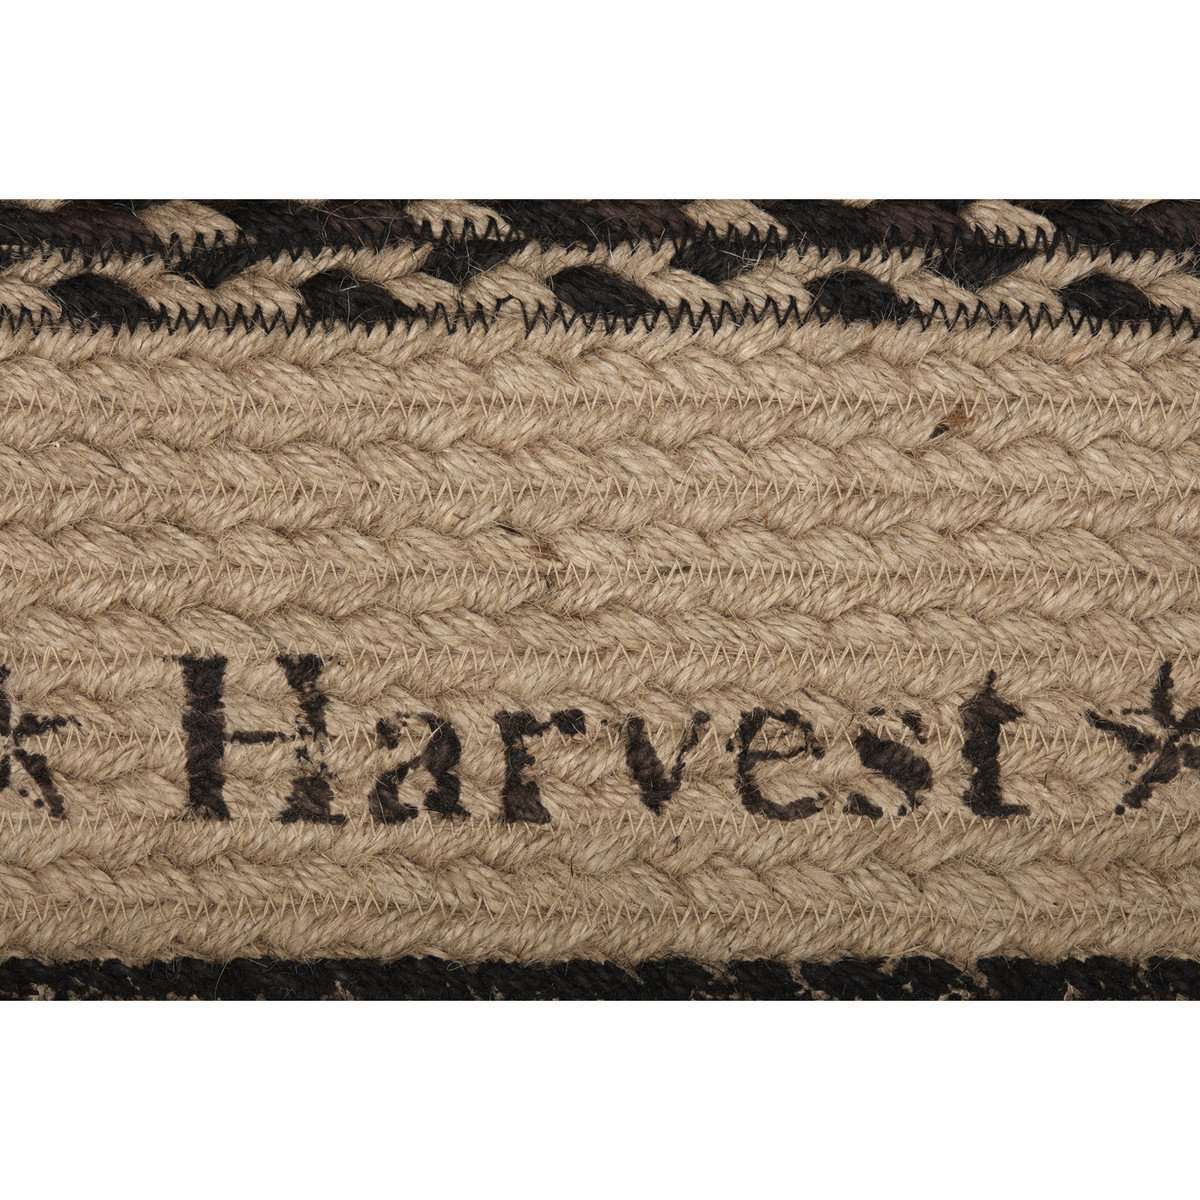 Sawyer Mill Charcoal Plow Braided Jute Rug Oval/Rect VHC Brands rugs VHC Brands 